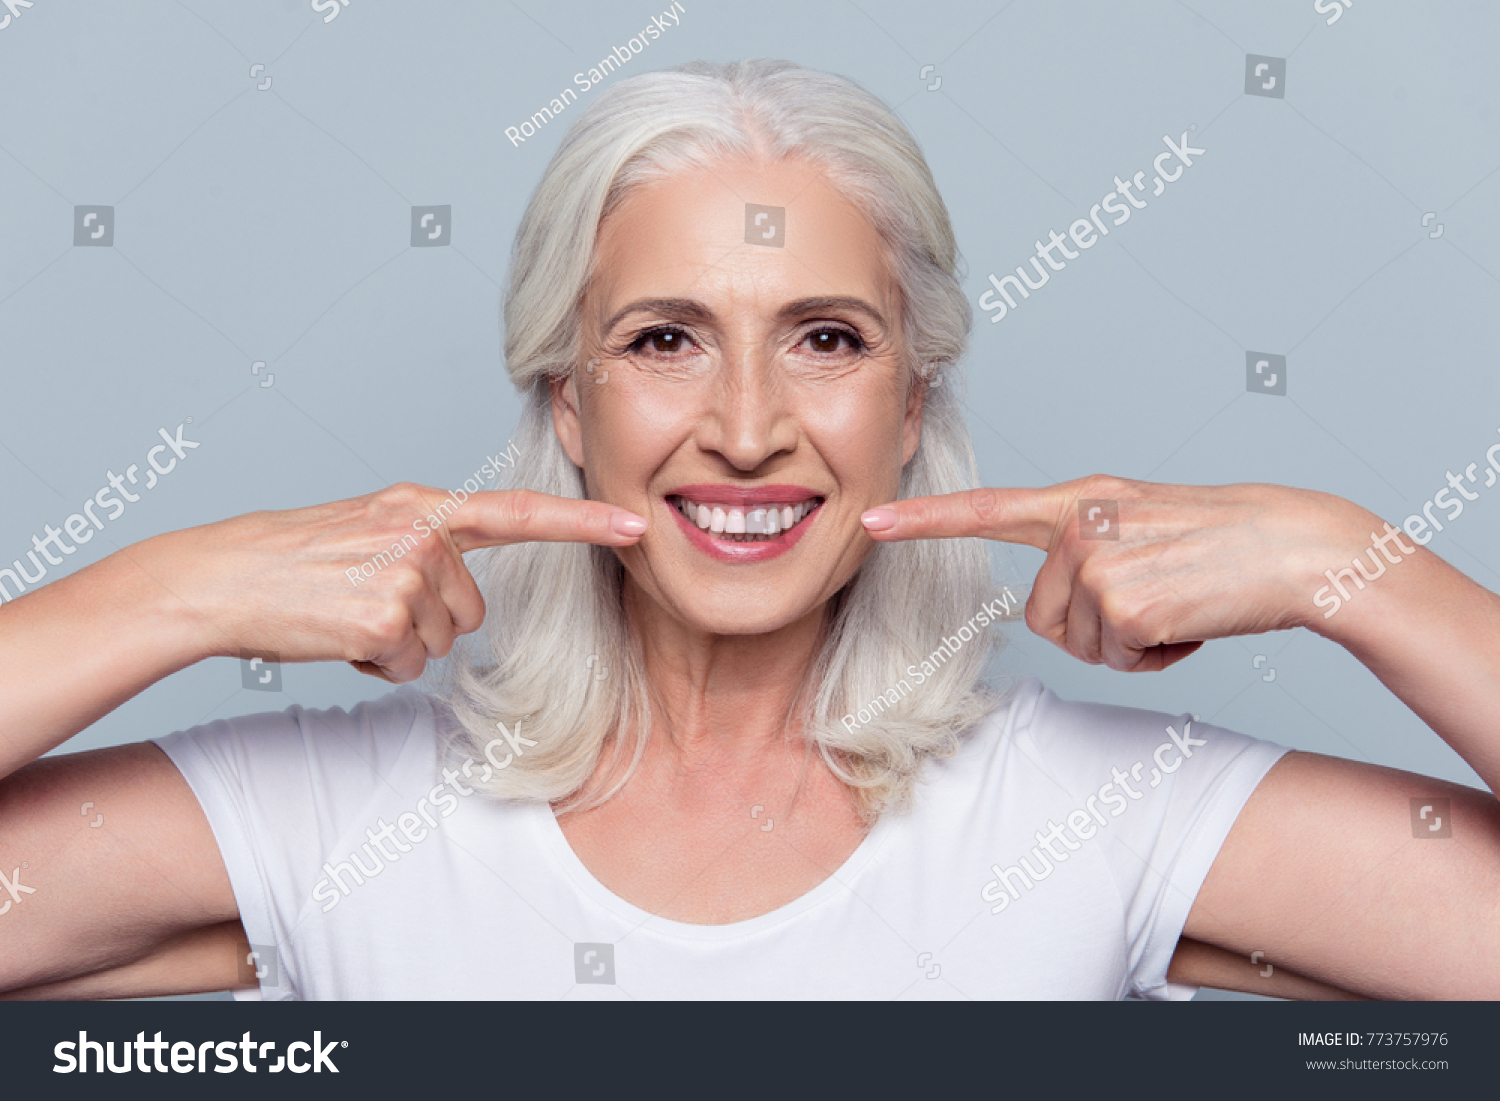 Concept of having strong healthy straight white teeth at old age. Close up portrait of happy with beaming smile female pensioner pointing on her perfect clear white teeth, isolated on gray background #773757976